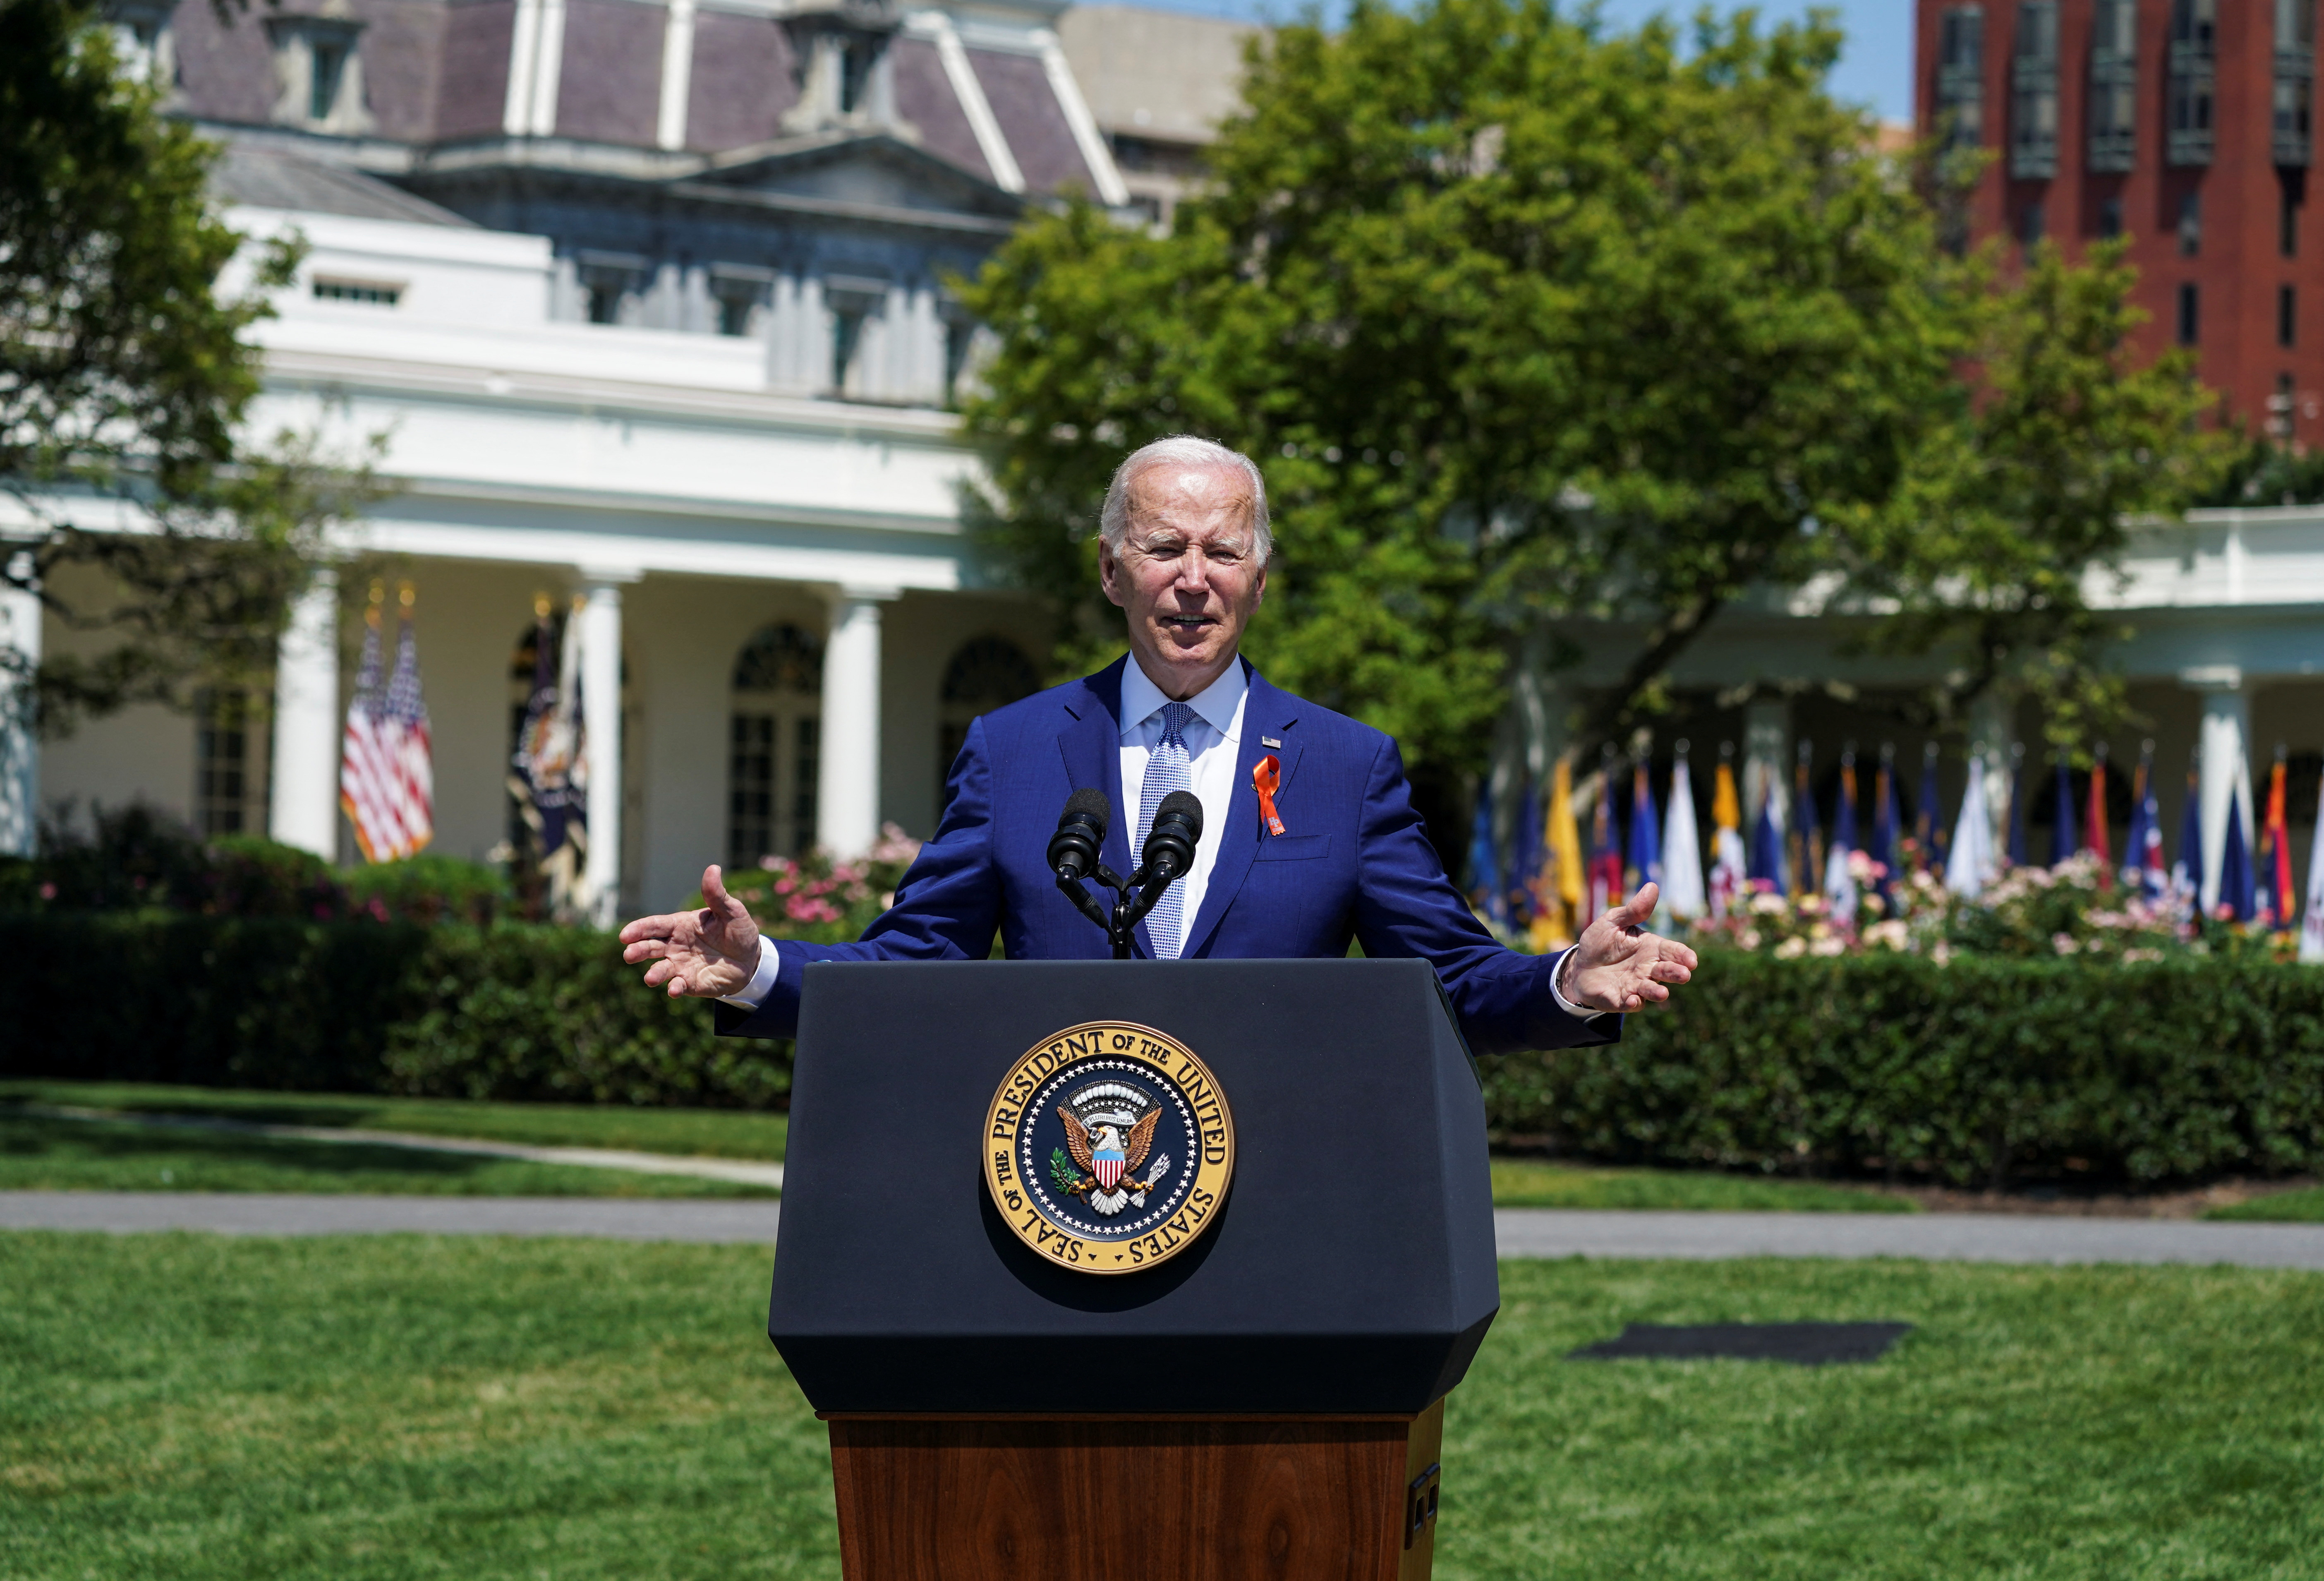 U.S. President Biden holds event to mark passage of gun safety law at the White House in Washington